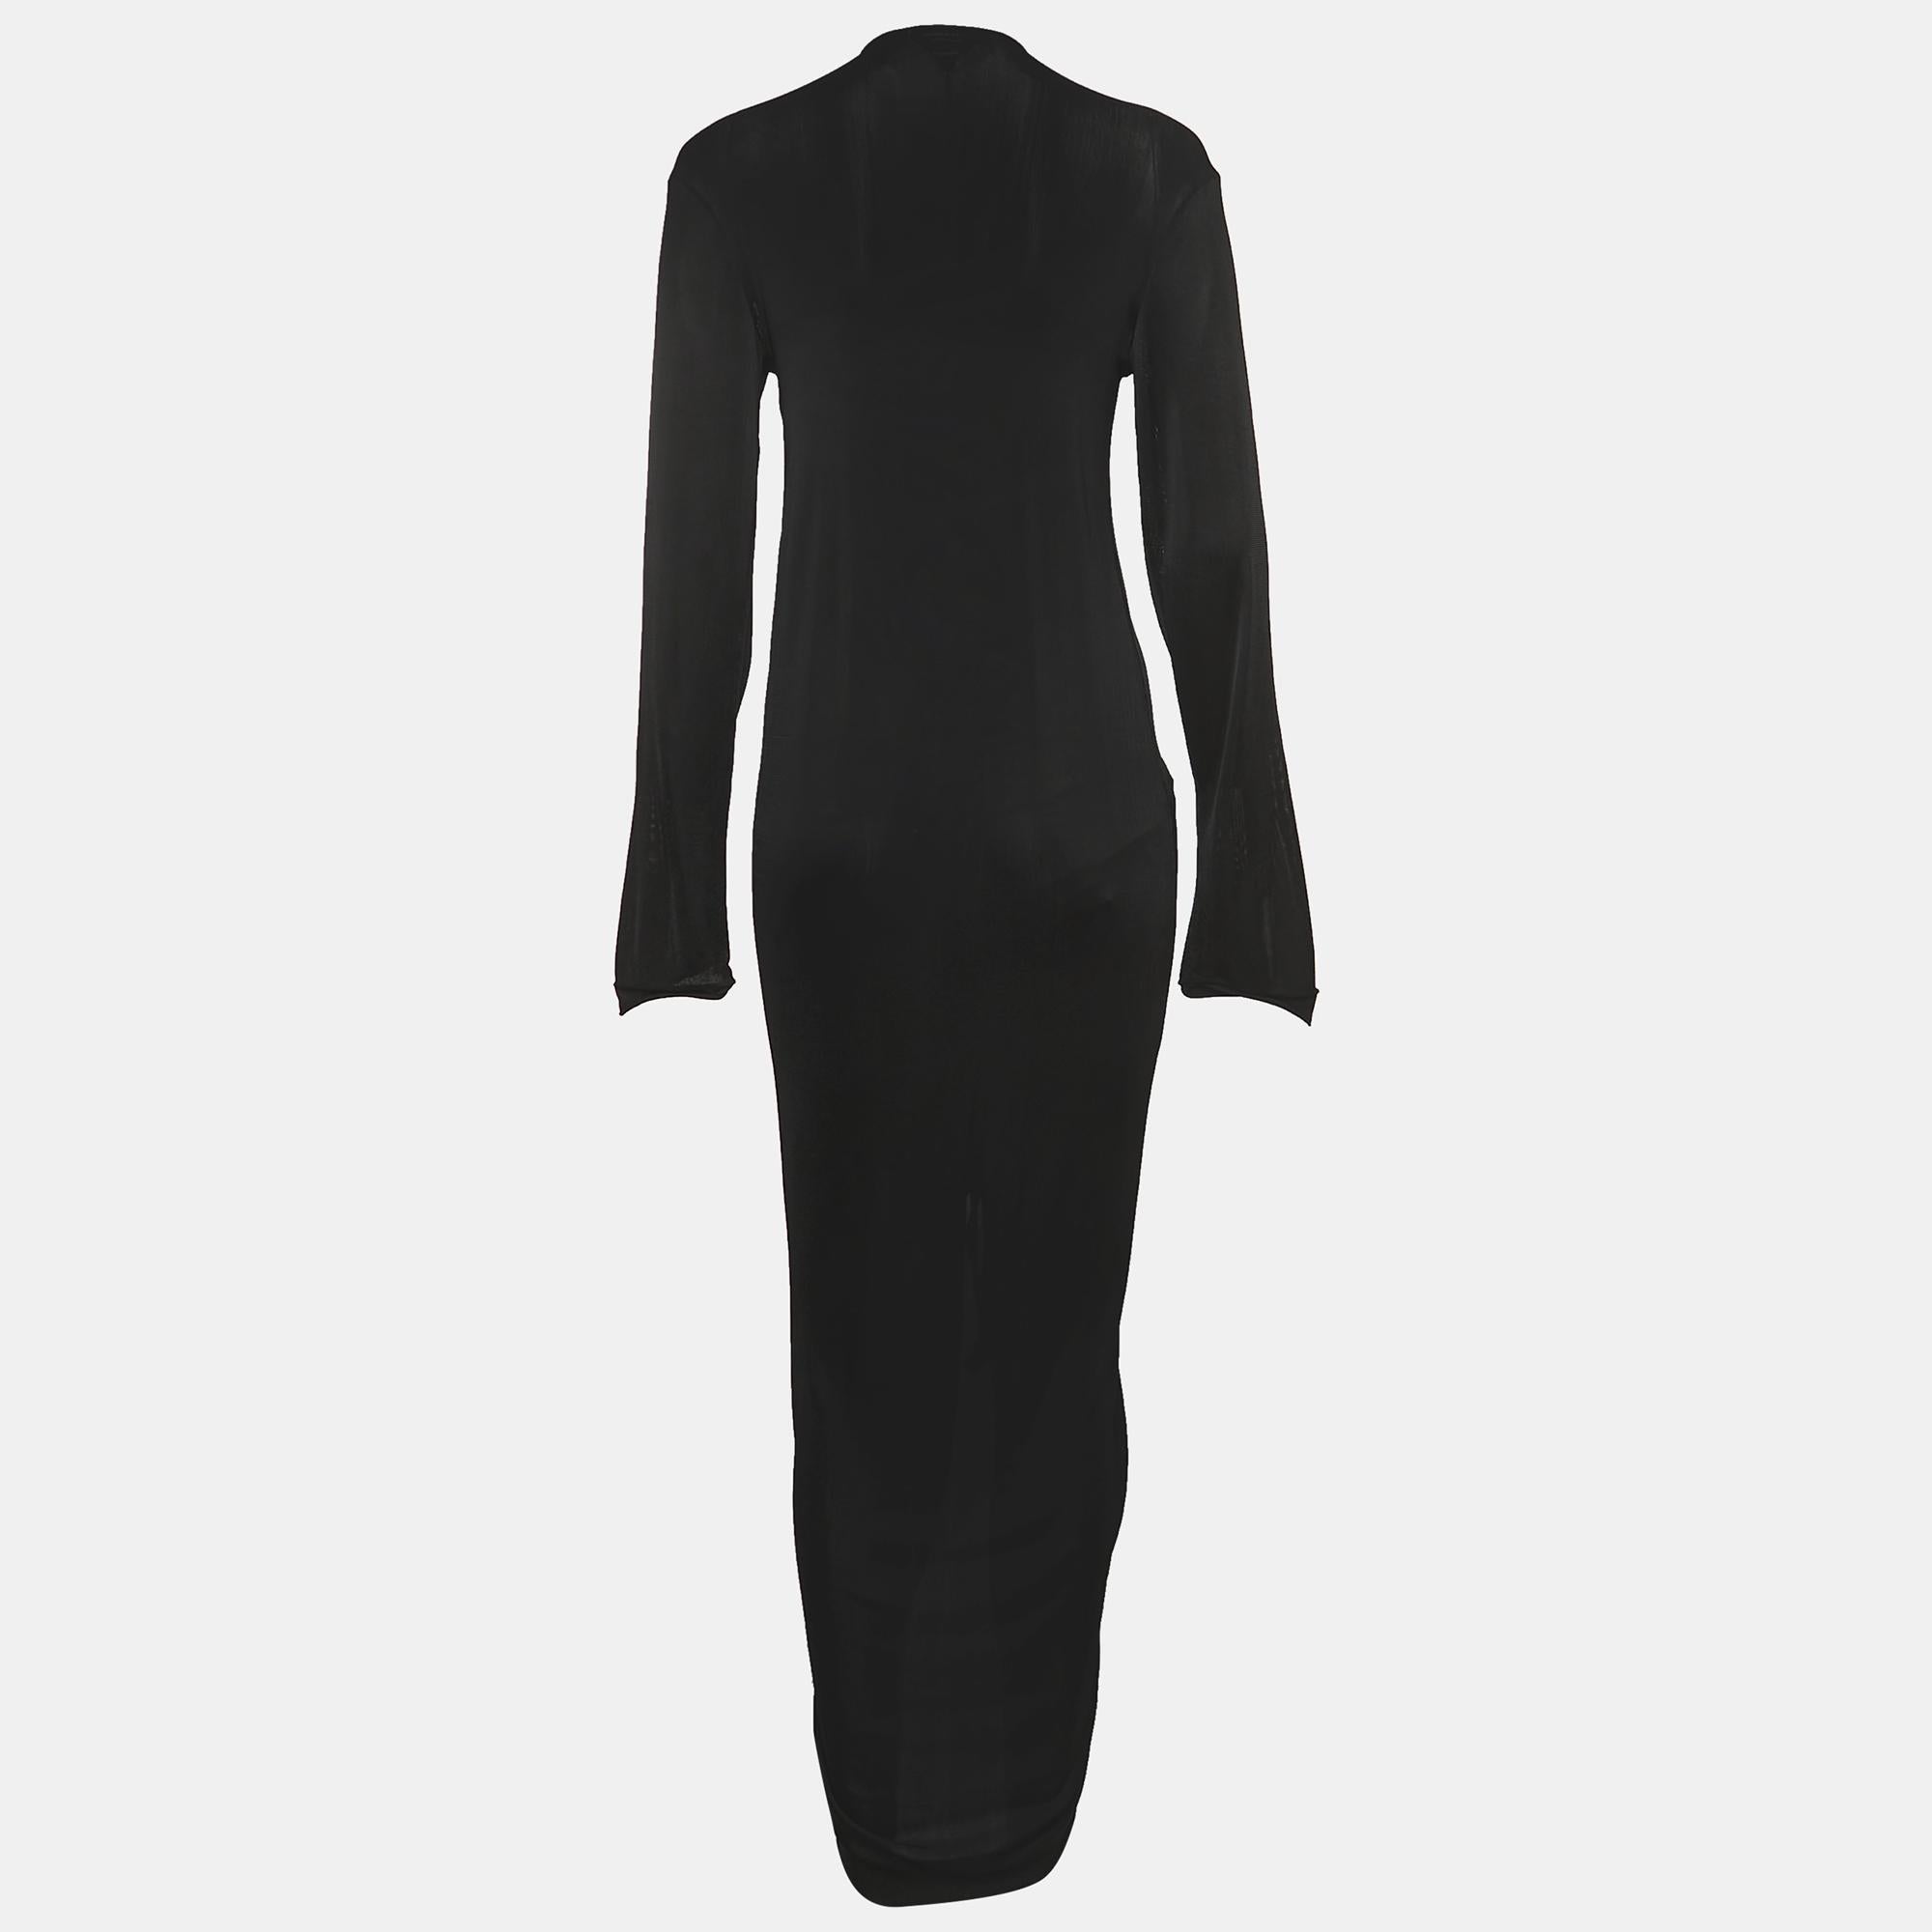 Exhibit a stylish look by wearing this beautiful designer Bottega Veneta dress. Tailored using fine fabric, this dress has a chic silhouette for a framing fit. Style the creation with chic accessories and pumps.

